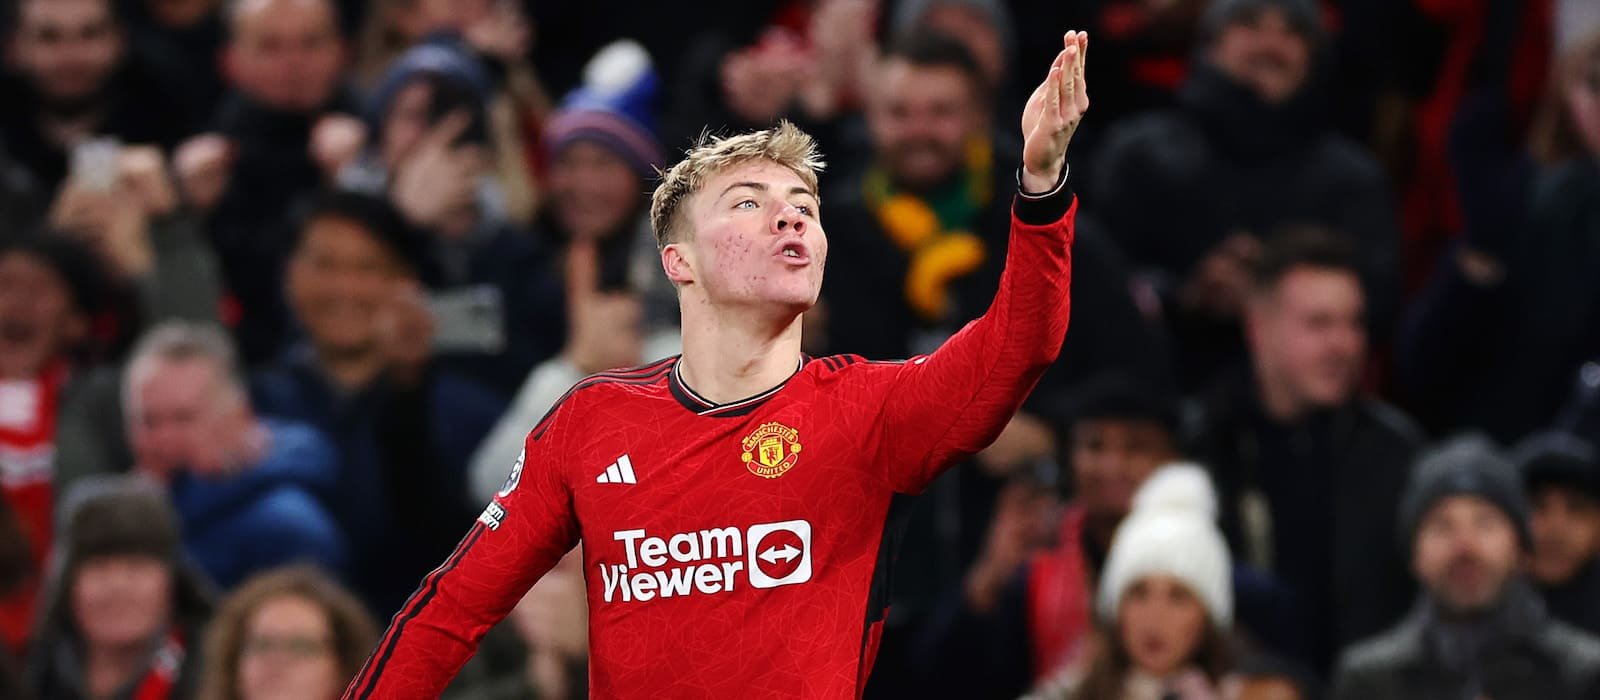 Rasmus Hojlund named in Premier League Team of the Week for matchday 21 – Man United News And Transfer News